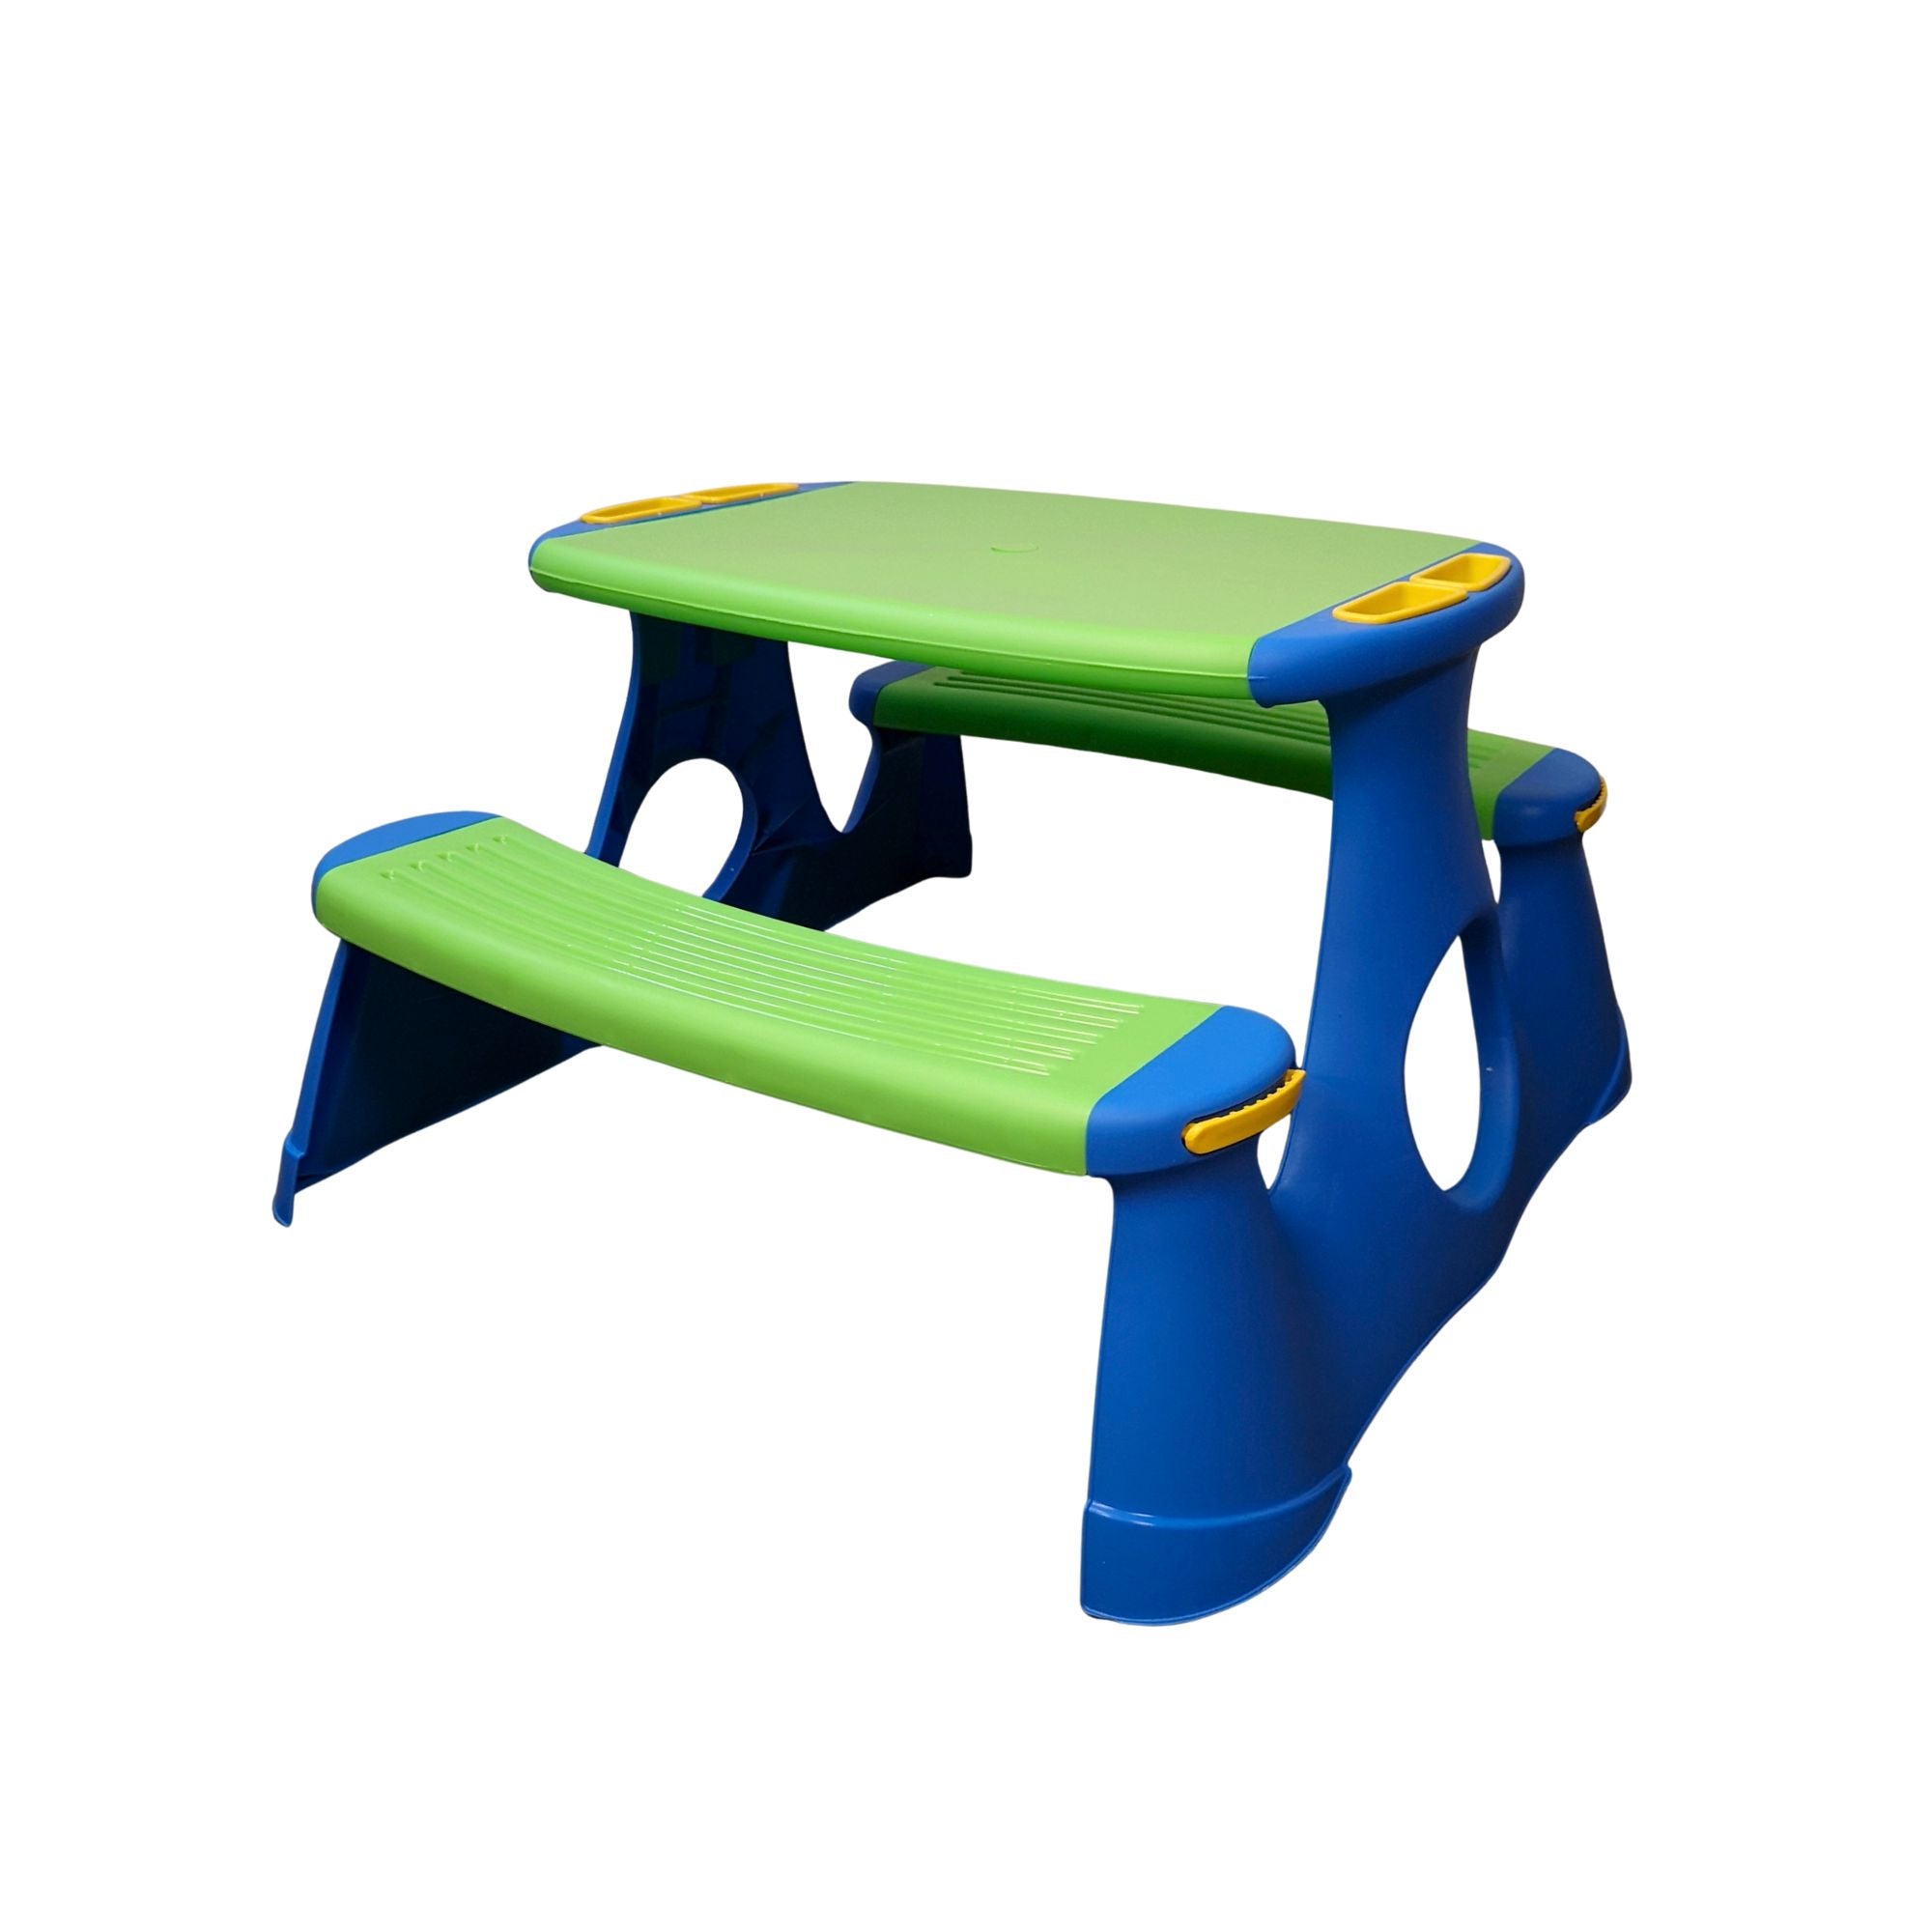 48cm Kids Outdoor Garden Patio Plastic Picnic Table and Bench